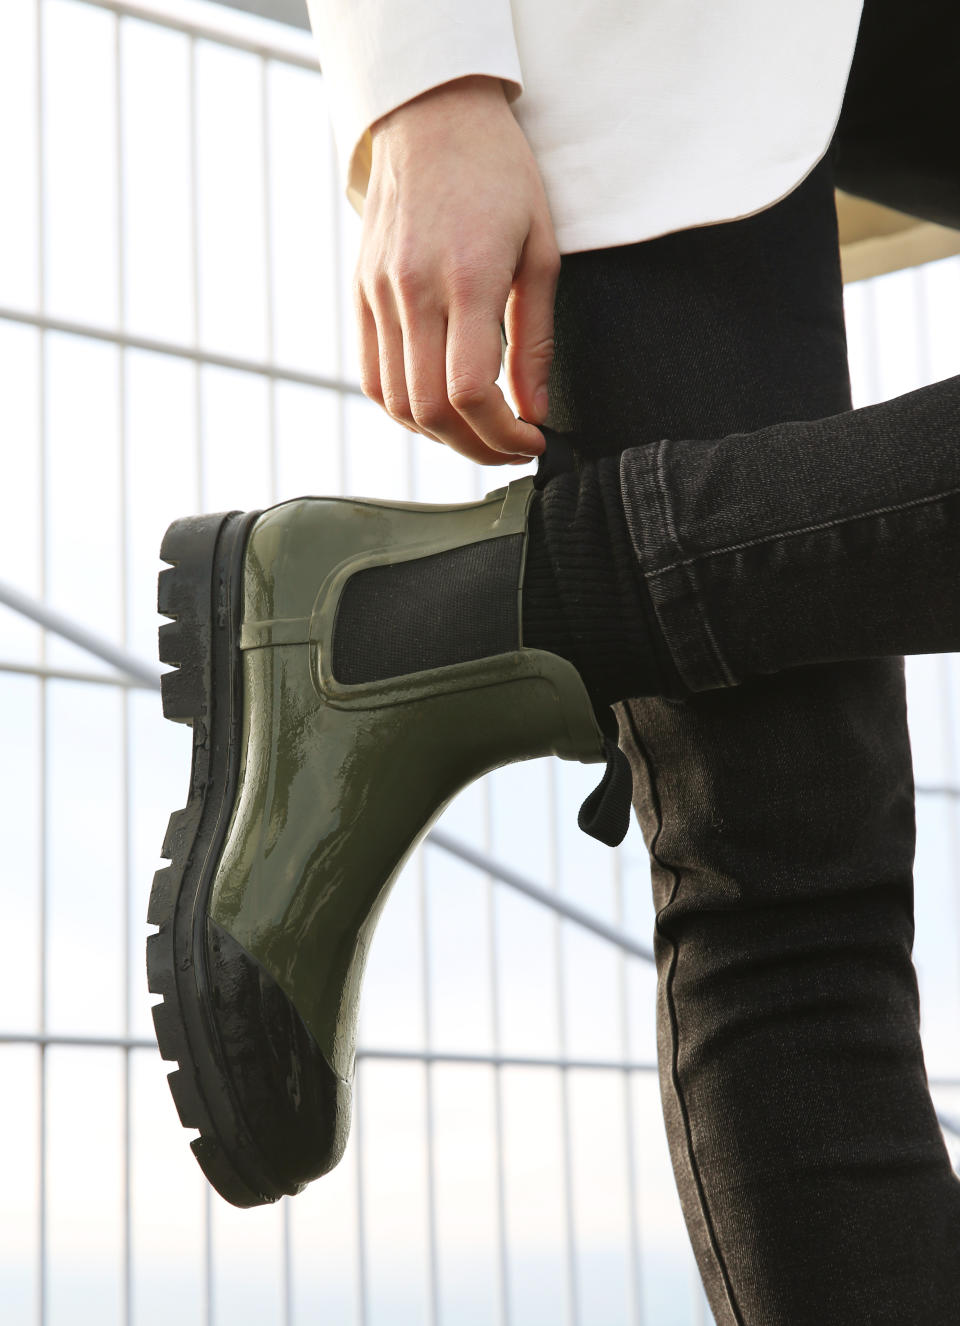 The cool black-toe-capped boots won’t rain on your fashion parade. (Photo: Everlane)